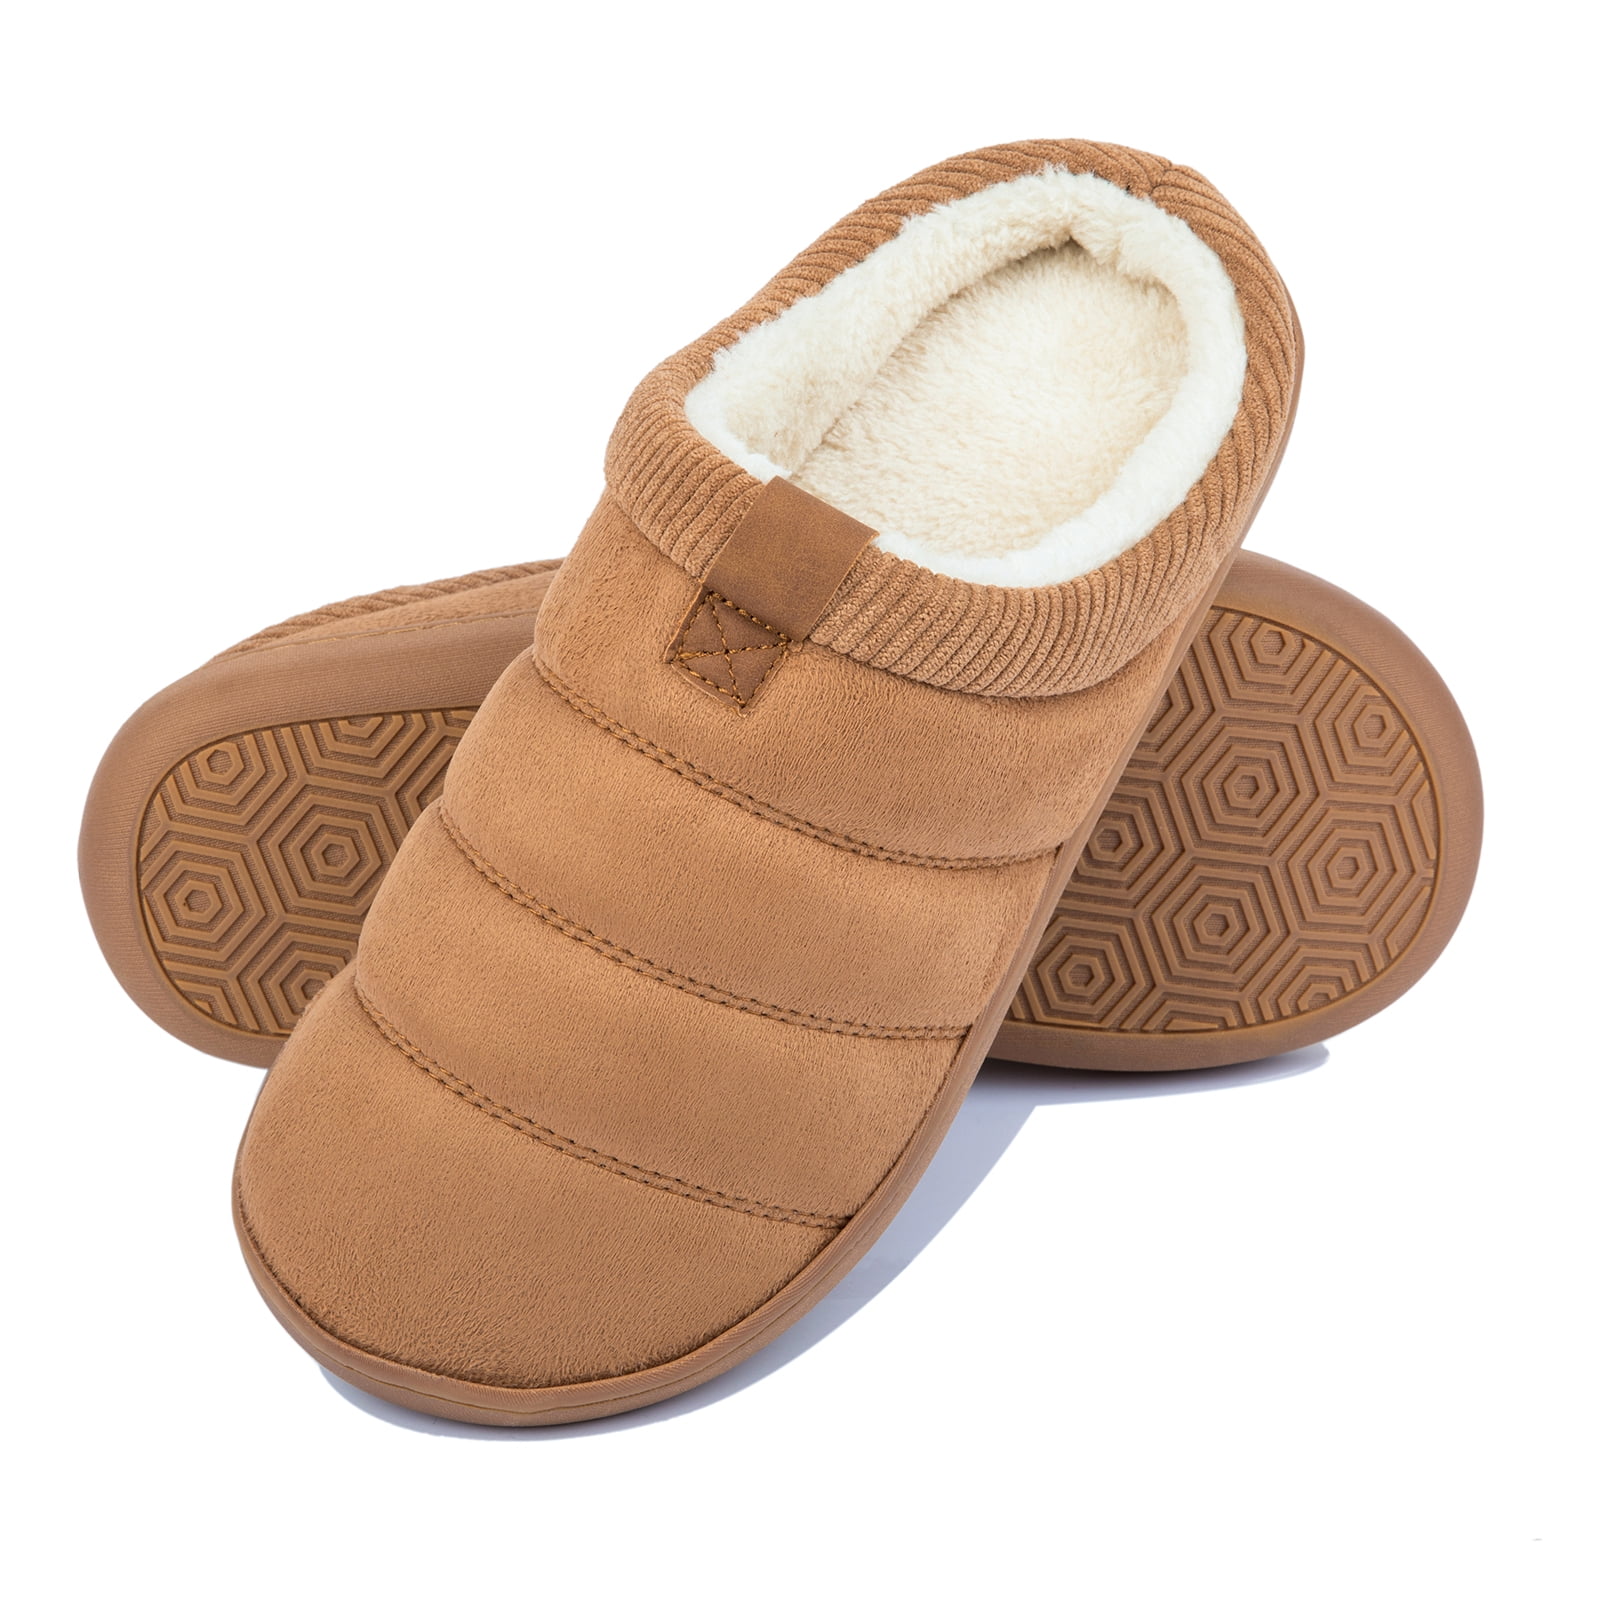 WOTTE Men's Moccasin Slippers Microsuede Fleece Fuzzy Lined Memory Foam House Shoes for Indoor Outdoor 